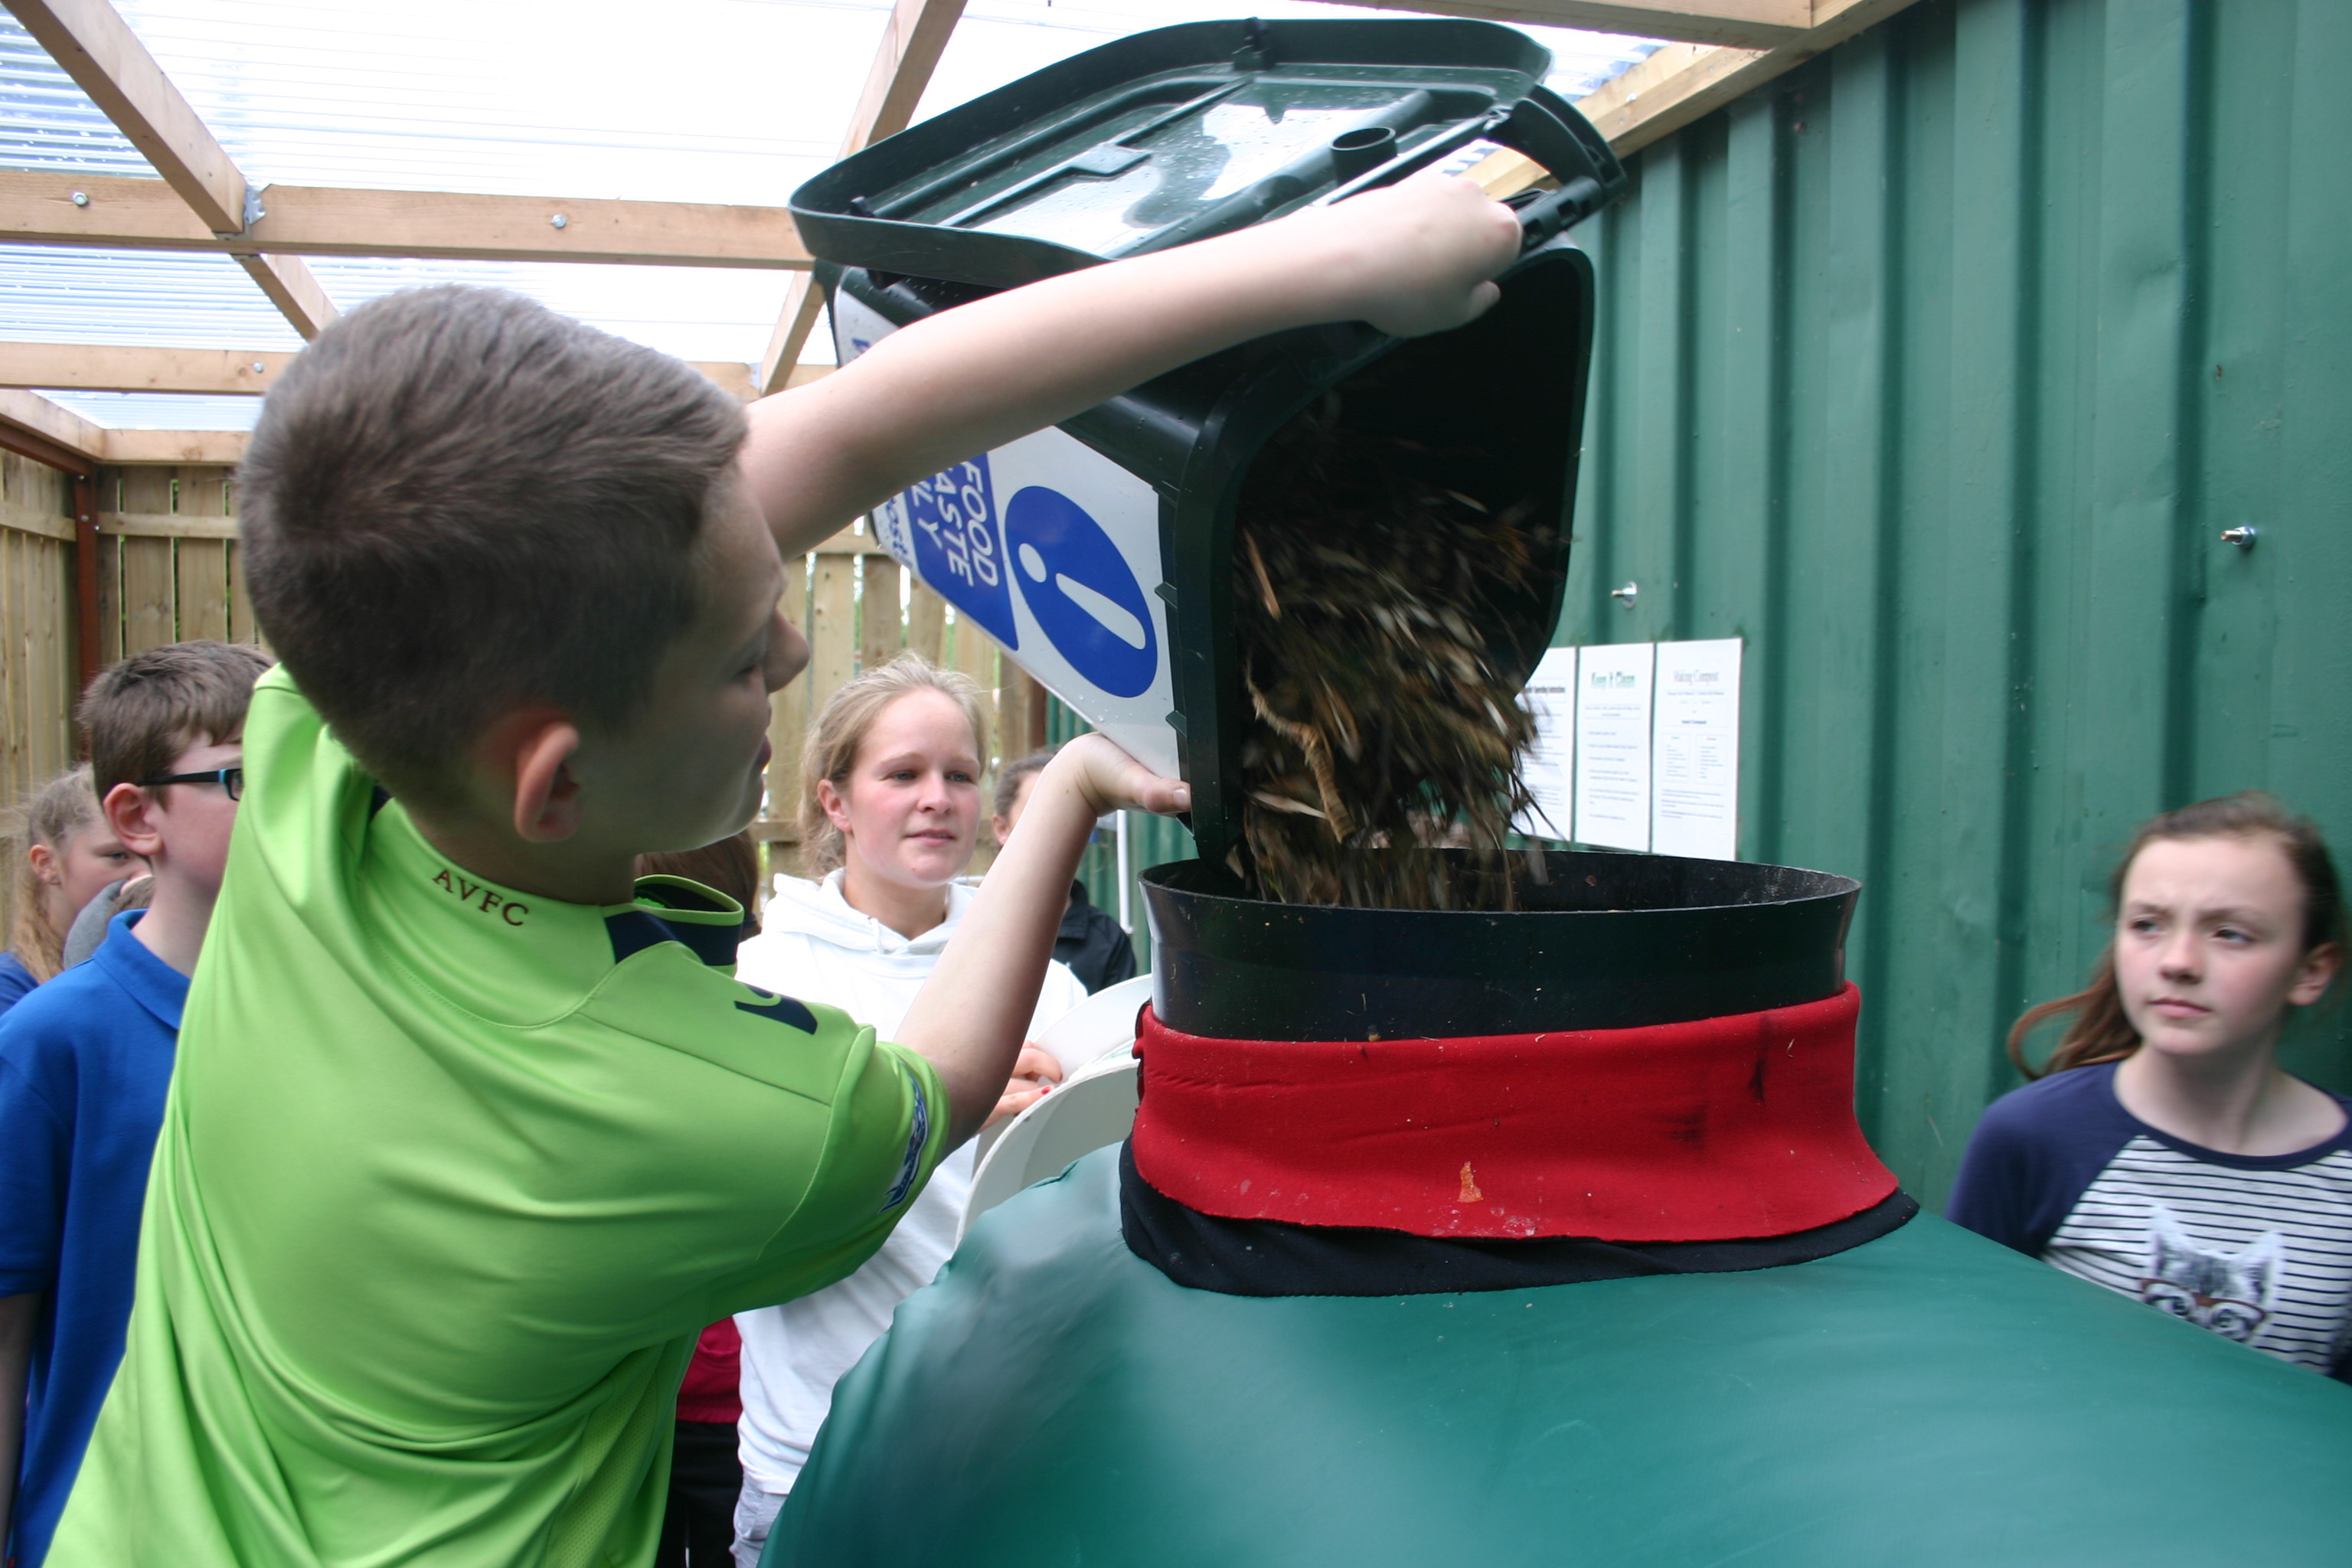 loading the food waste composter